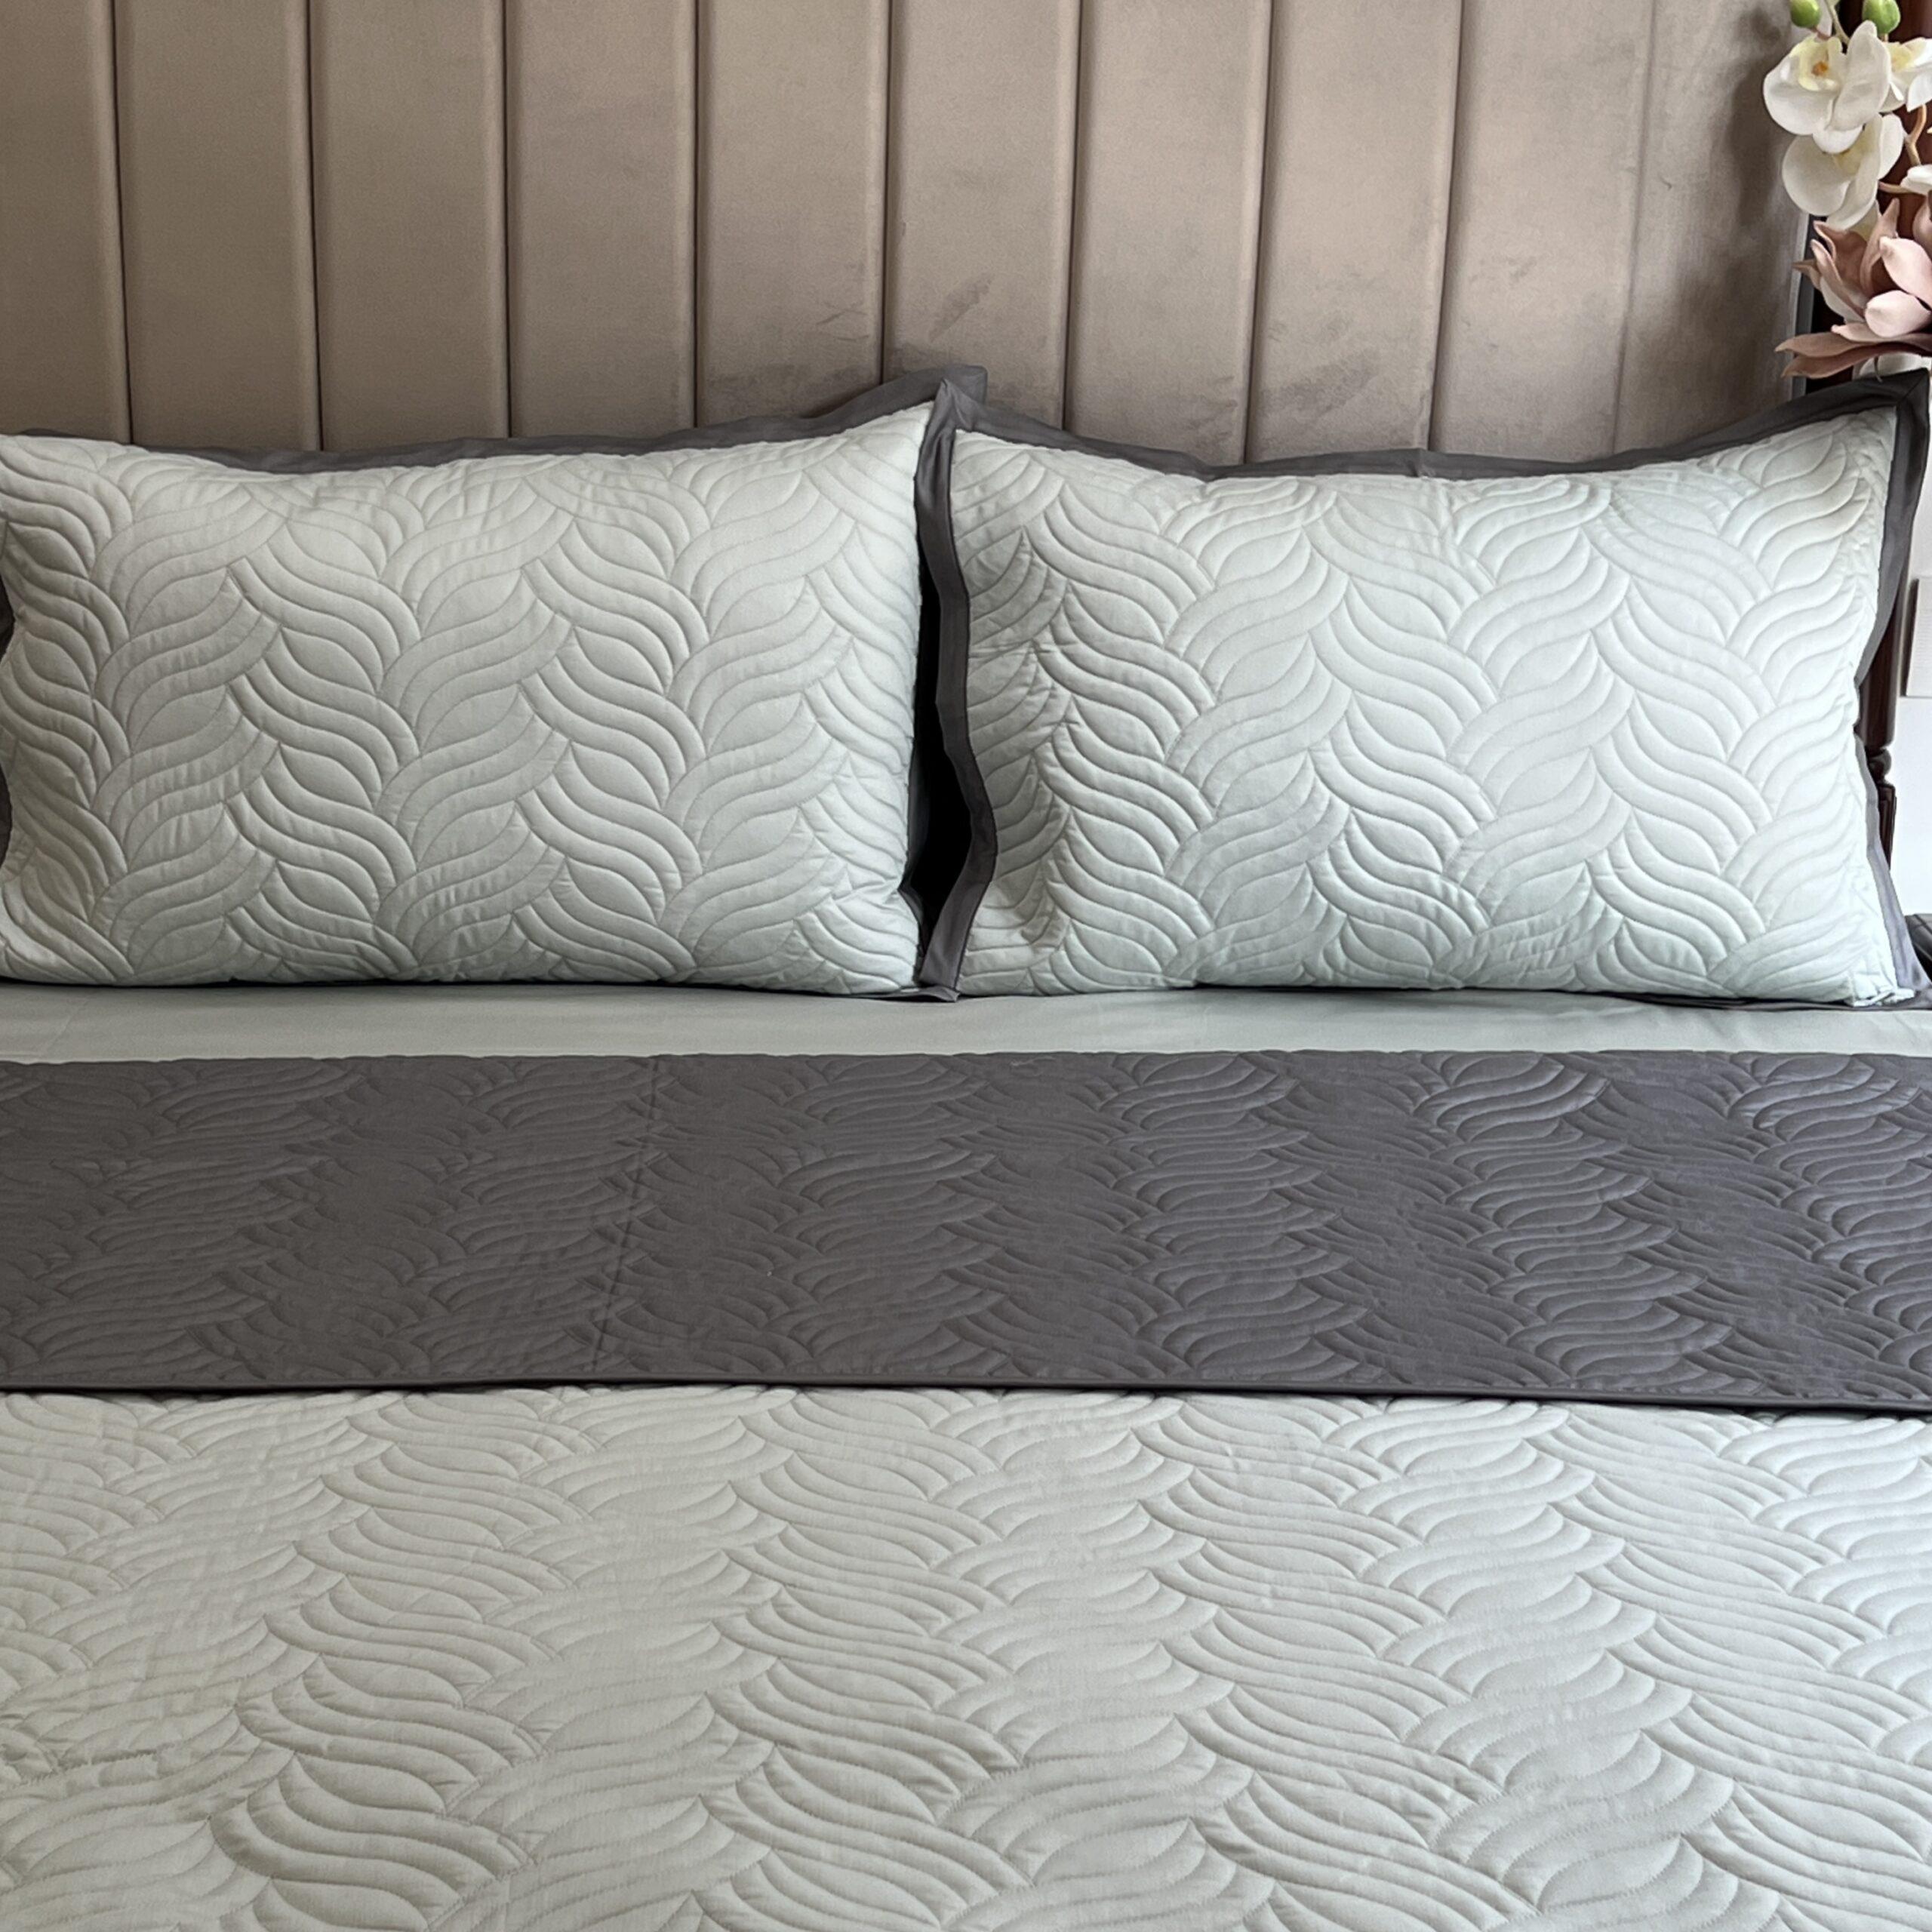 Quilted Sage Green and Grey Comber Reversible Bedspread